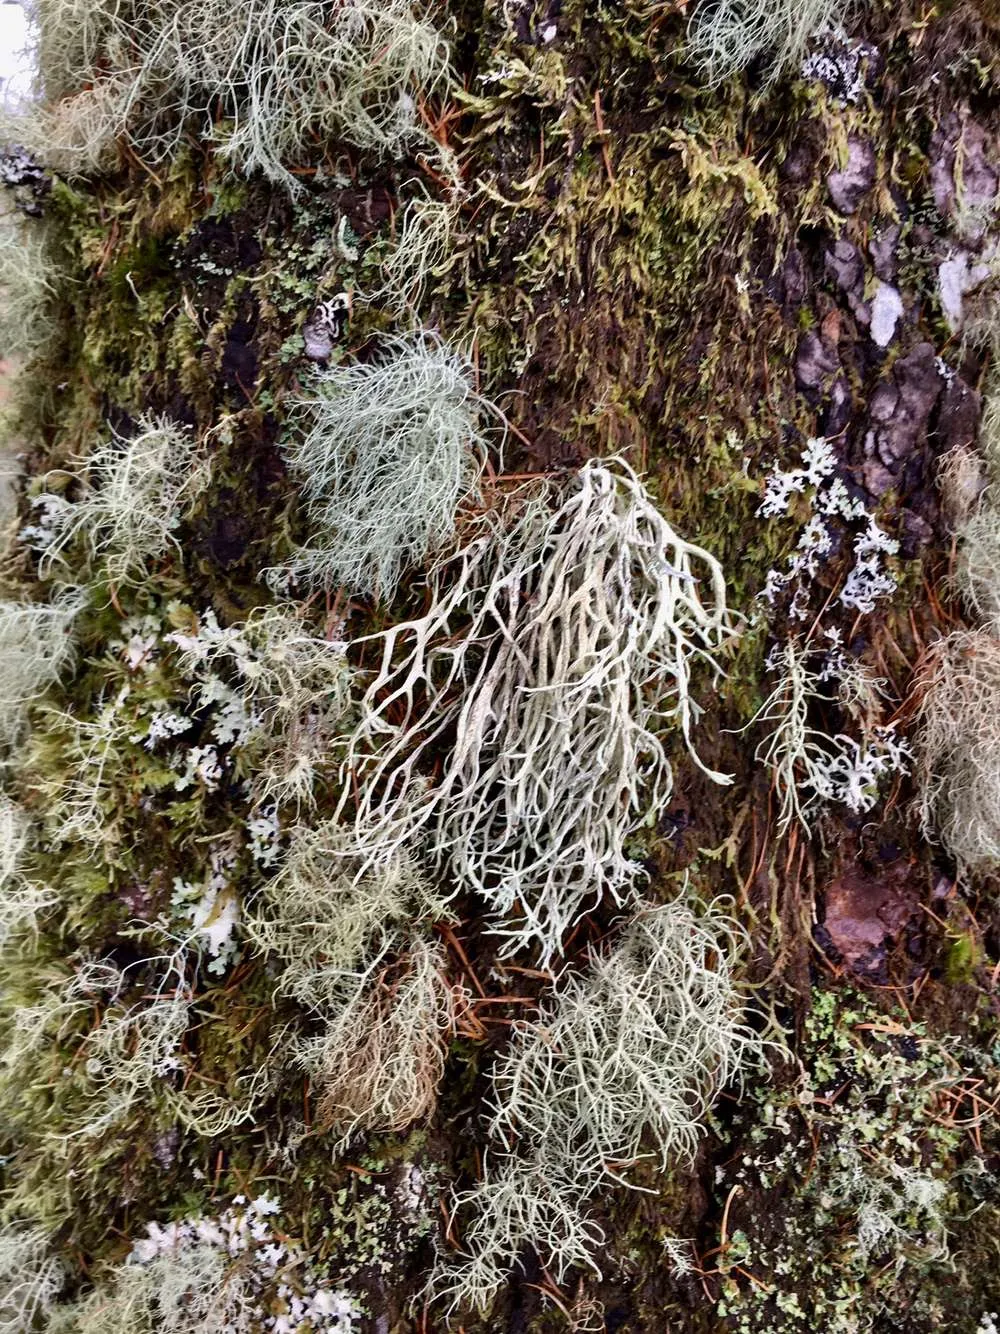 Moss and lichen, Co. Sligo, primary imagery. Inspired by the idea of growth